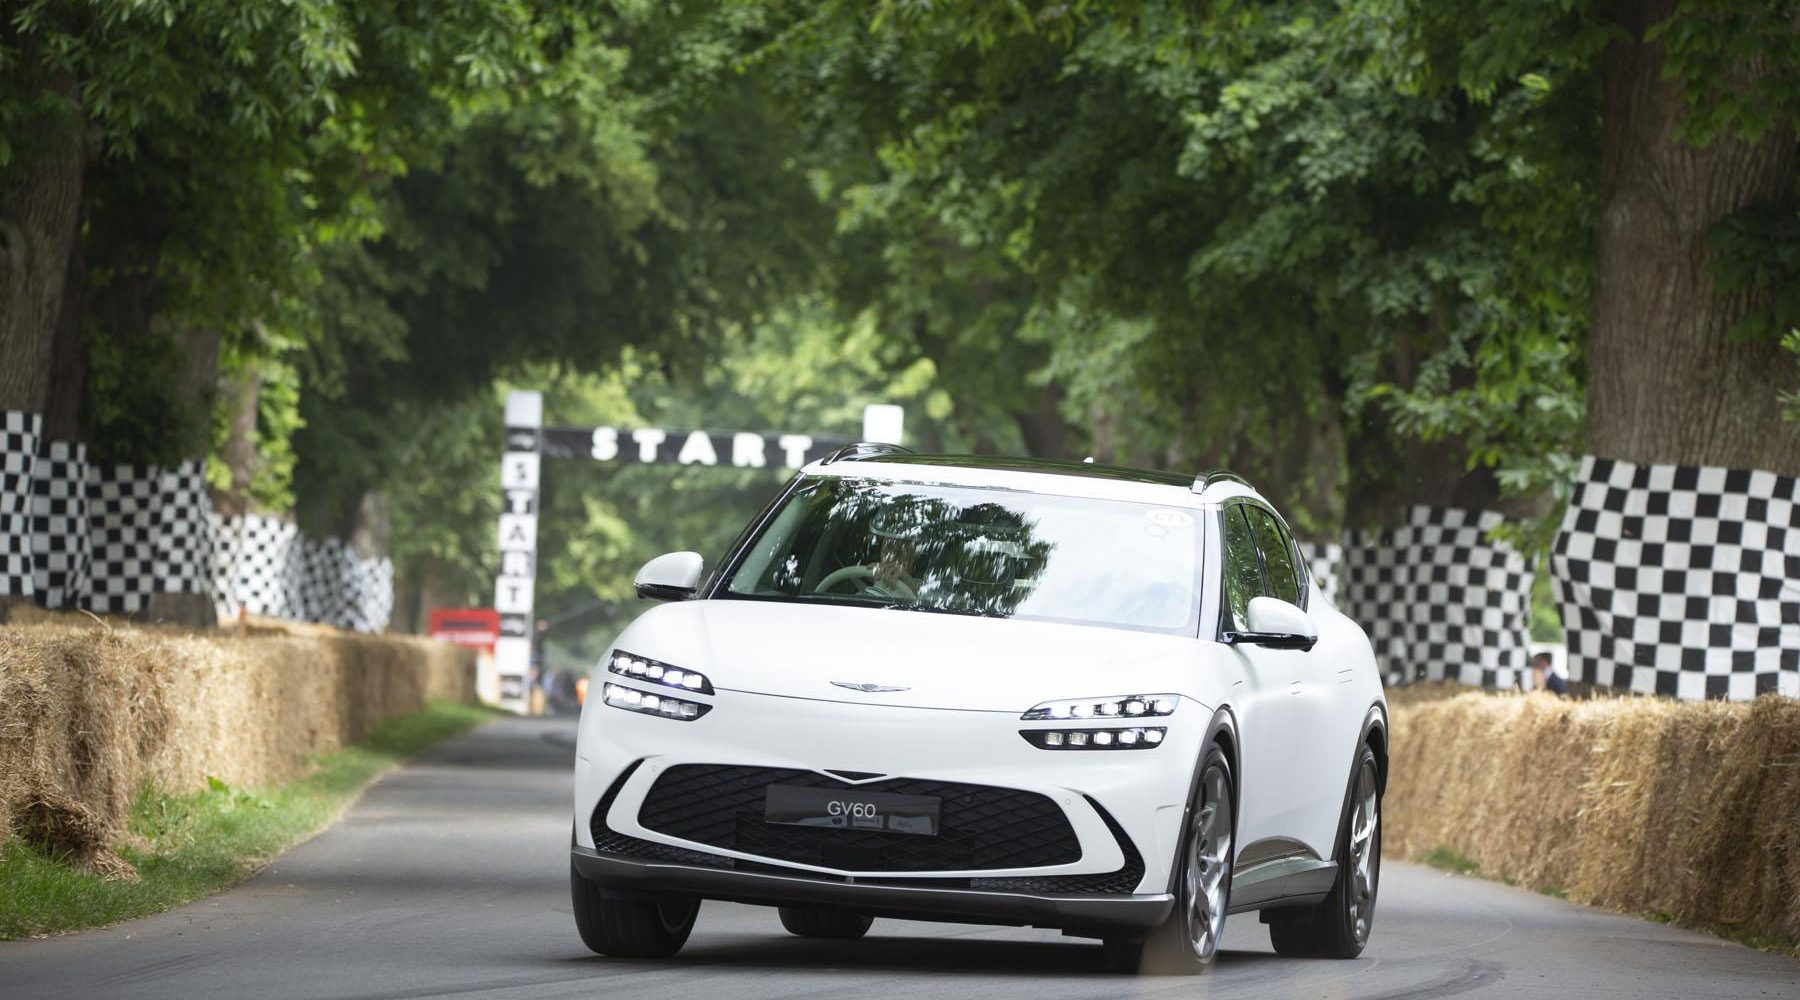 Genesis gears up for Goodwood Festival